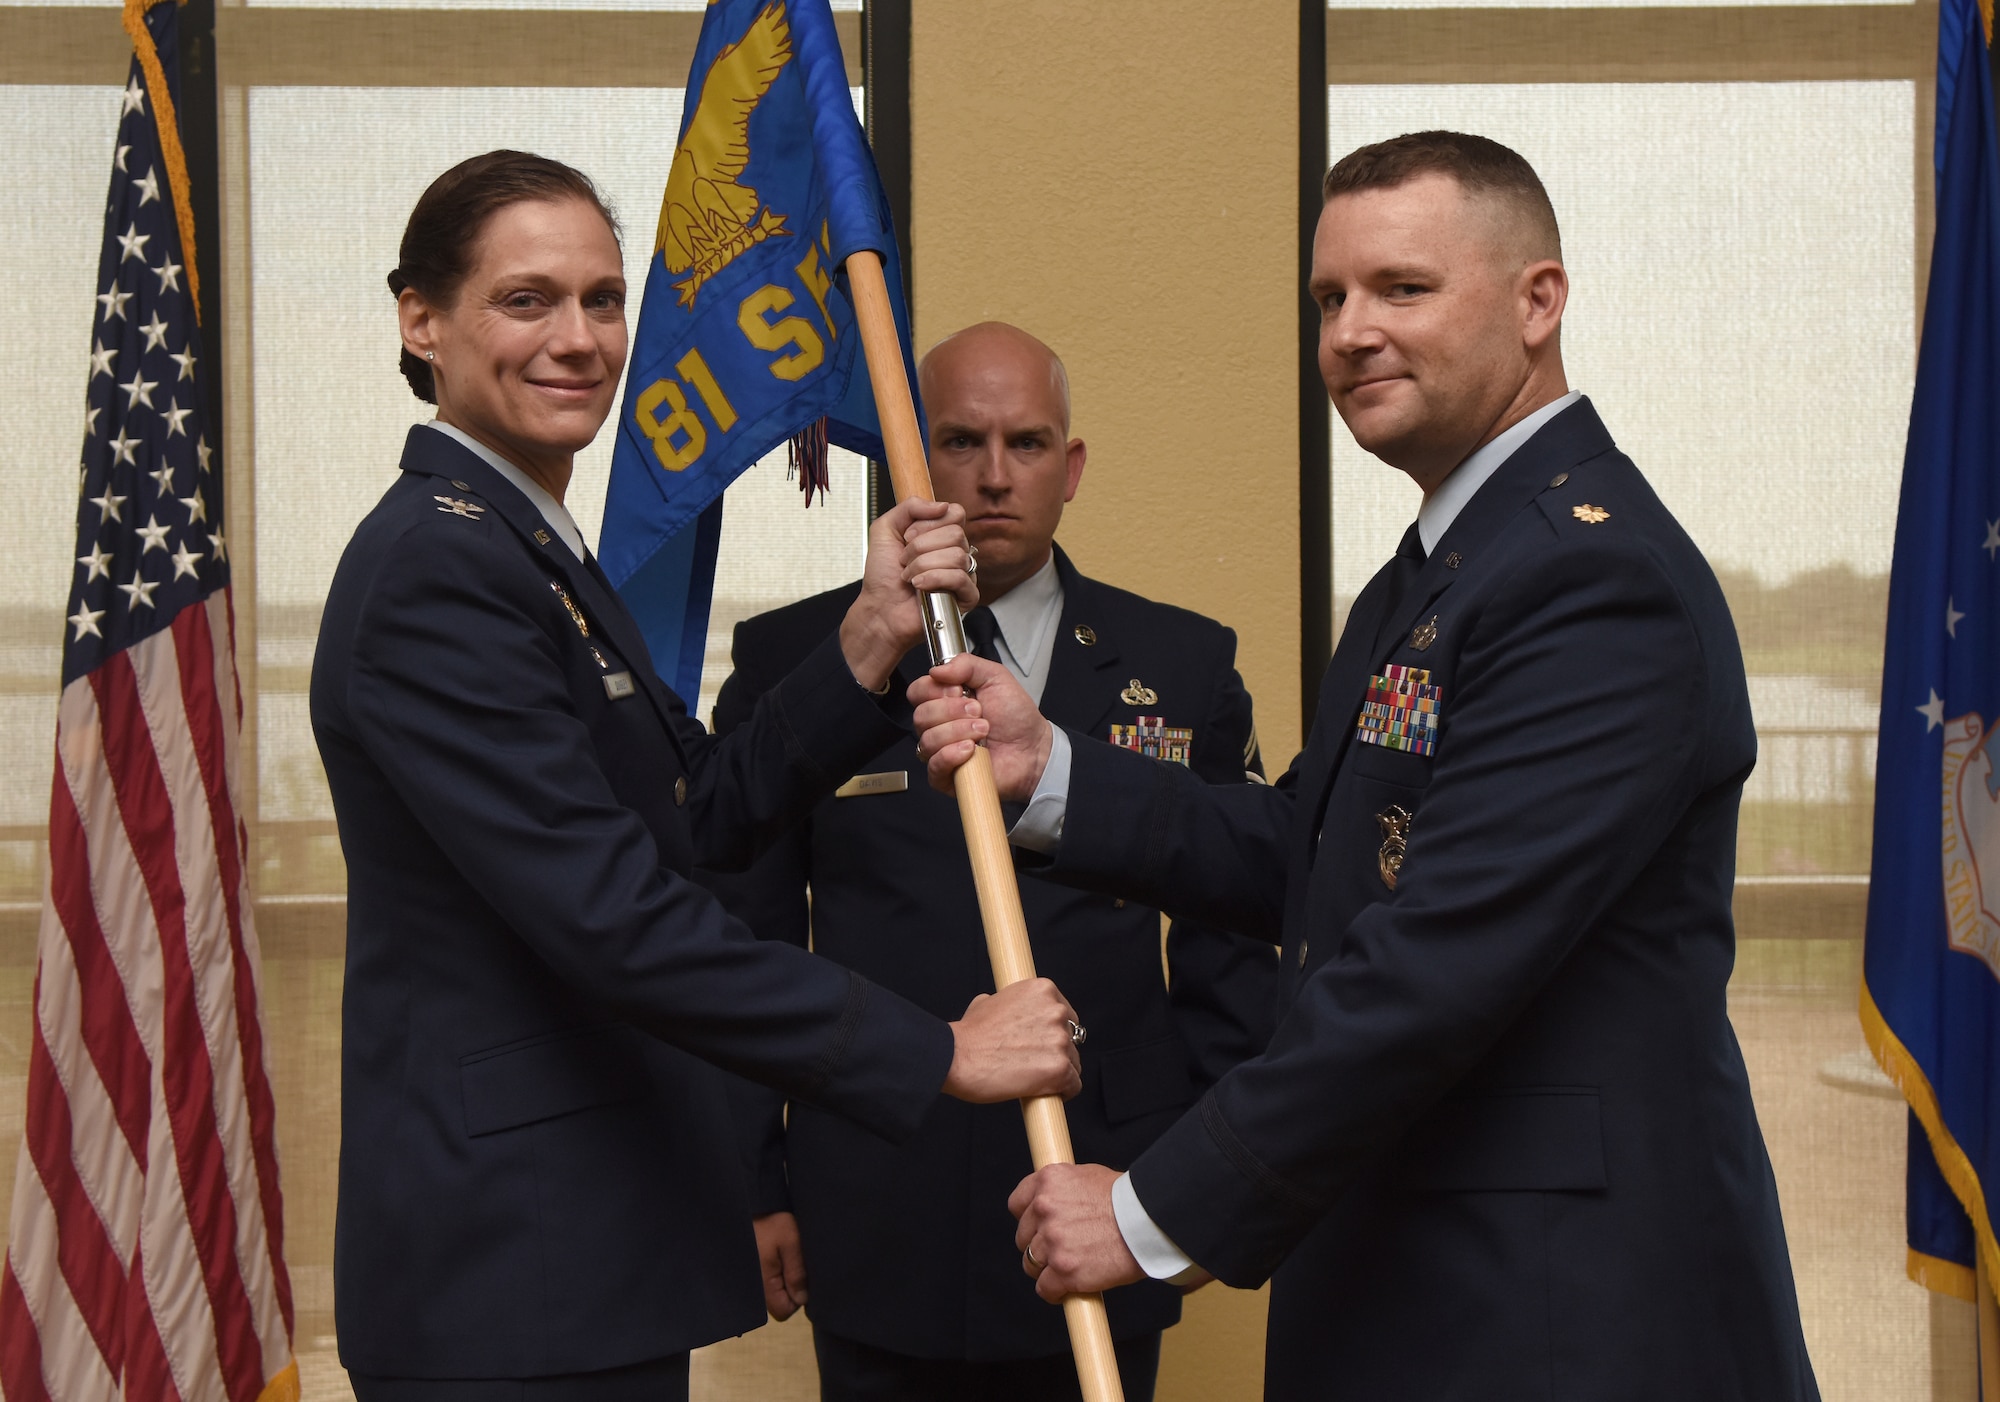 U.S. Air Force Col. Marcia Quigley, 81st Mission Support Group commander, passes the 81st Security Forces Squadron guidon to Maj. Matthew Lowe, incoming 81st SFS commander, during the 81st SFS change of command ceremony inside the Bay Breeze Event Center at Keesler Air Force Base, Mississippi, May 31, 2019. The passing of the guidon is a ceremonial symbol of exchanging command from one commander to another. (U.S. Air Force photo by Kemberly Groue)